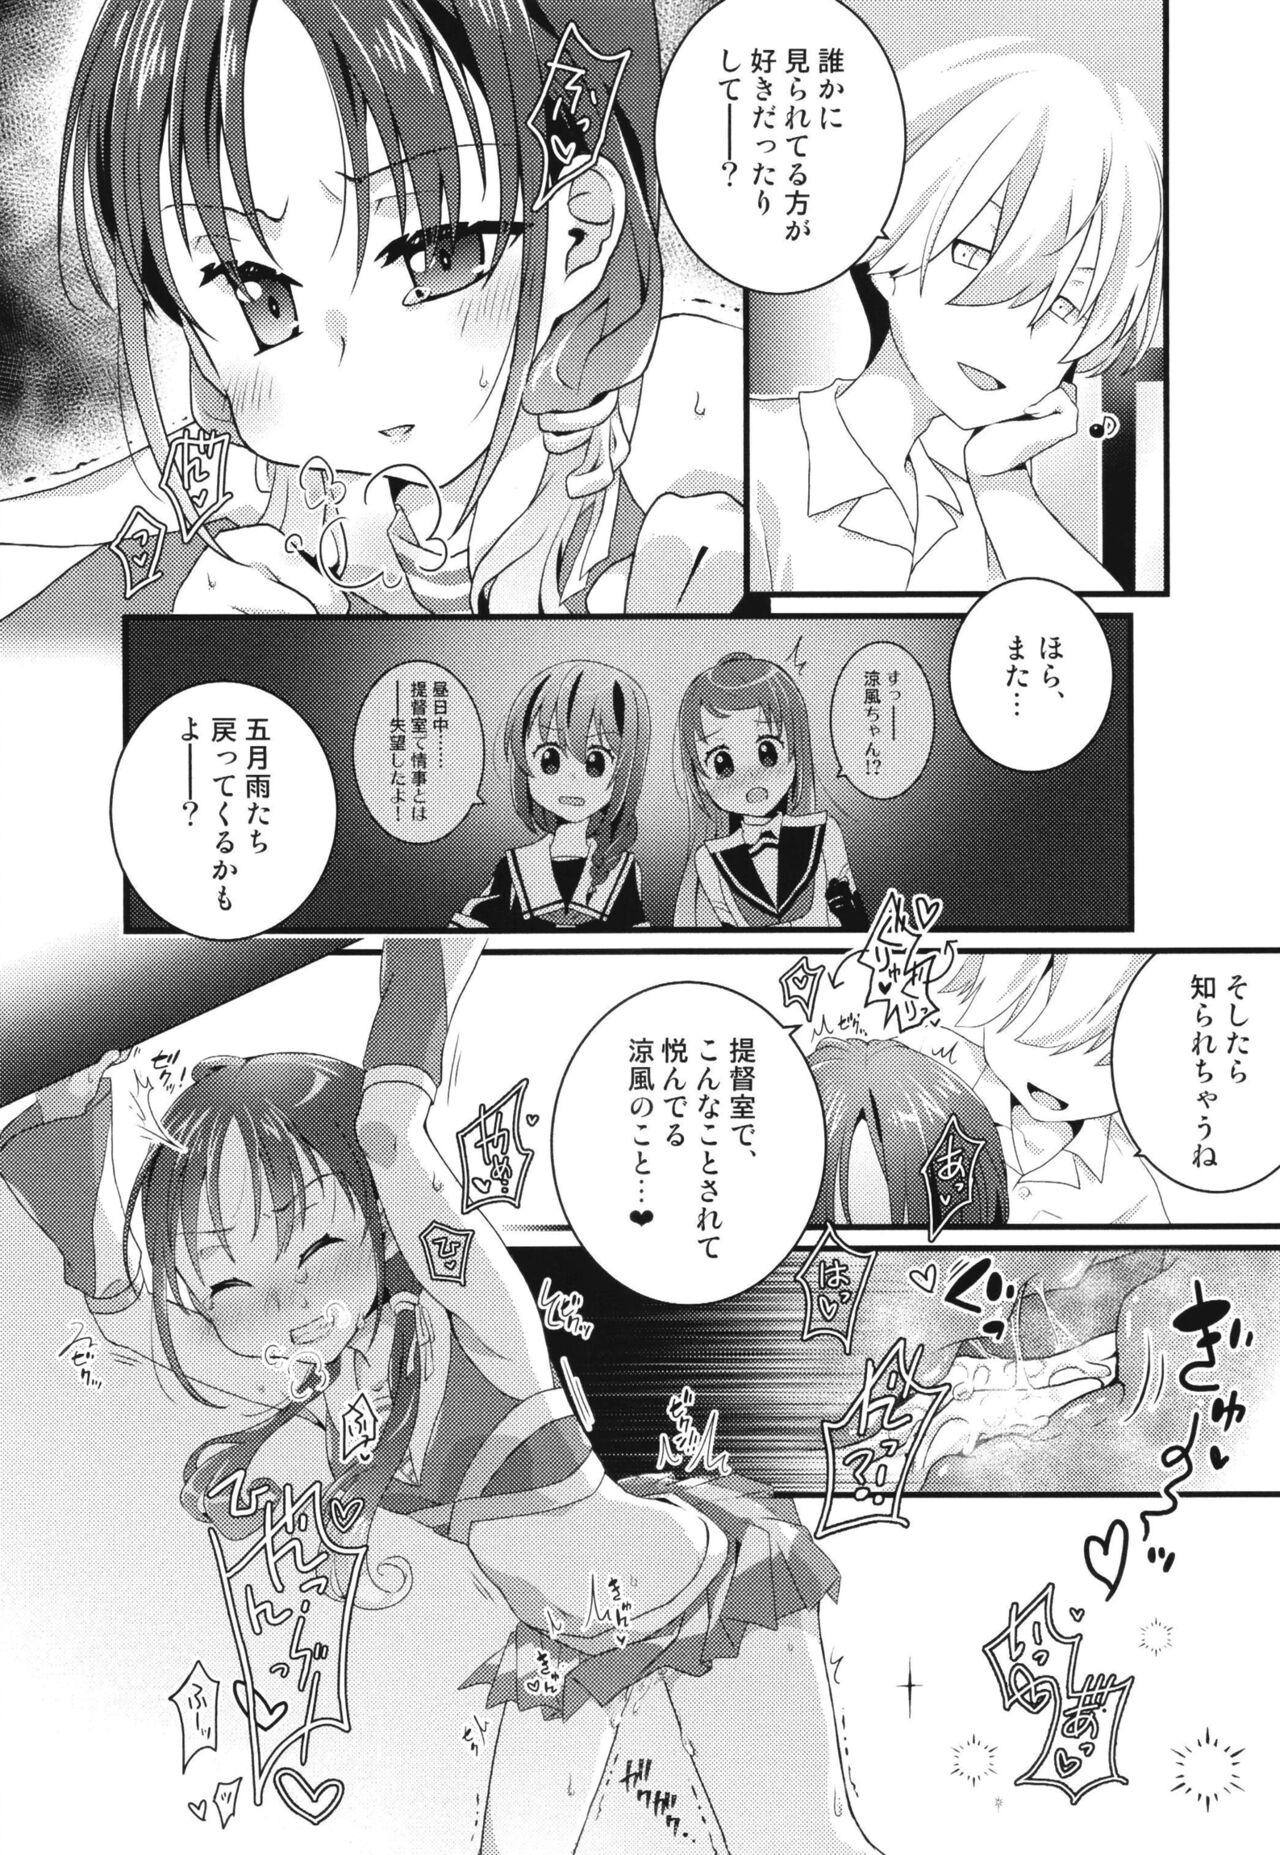 Interview Yah! Cheer! yeah! - Kantai collection Twistys - Page 6